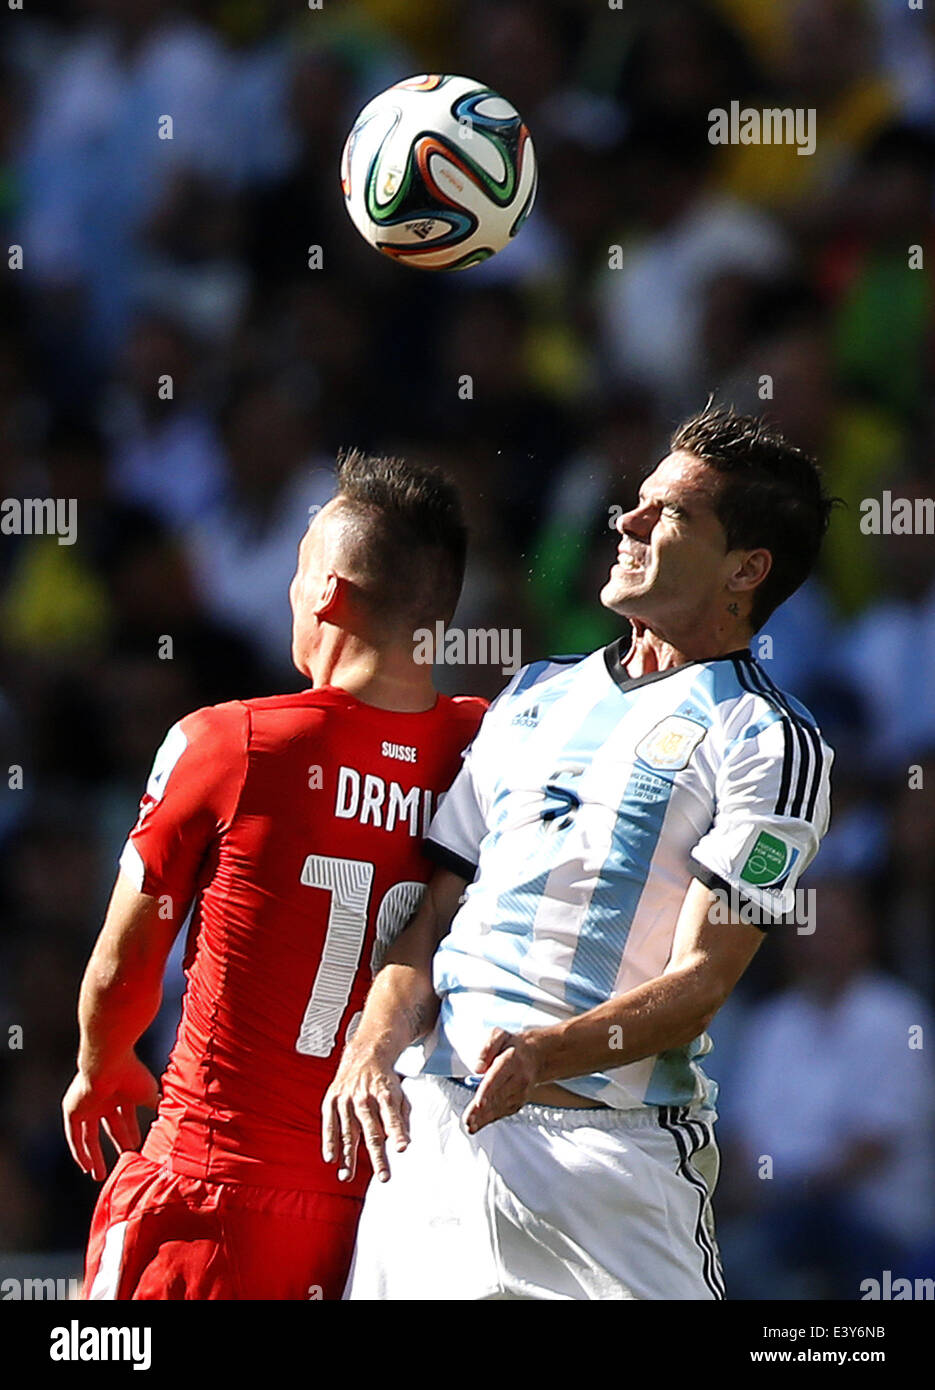 Sao Paulo, Brazil. 1st July, 2014. Switzerland's Josip Drmic (L) competes for a header with Argentina's Fernando Gago during a Round of 16 match between Argentina and Switzerland of 2014 FIFA World Cup at the Arena de Sao Paulo Stadium in Sao Paulo, Brazil, on July 1, 2014. Credit:  Wang Lili/Xinhua/Alamy Live News Stock Photo